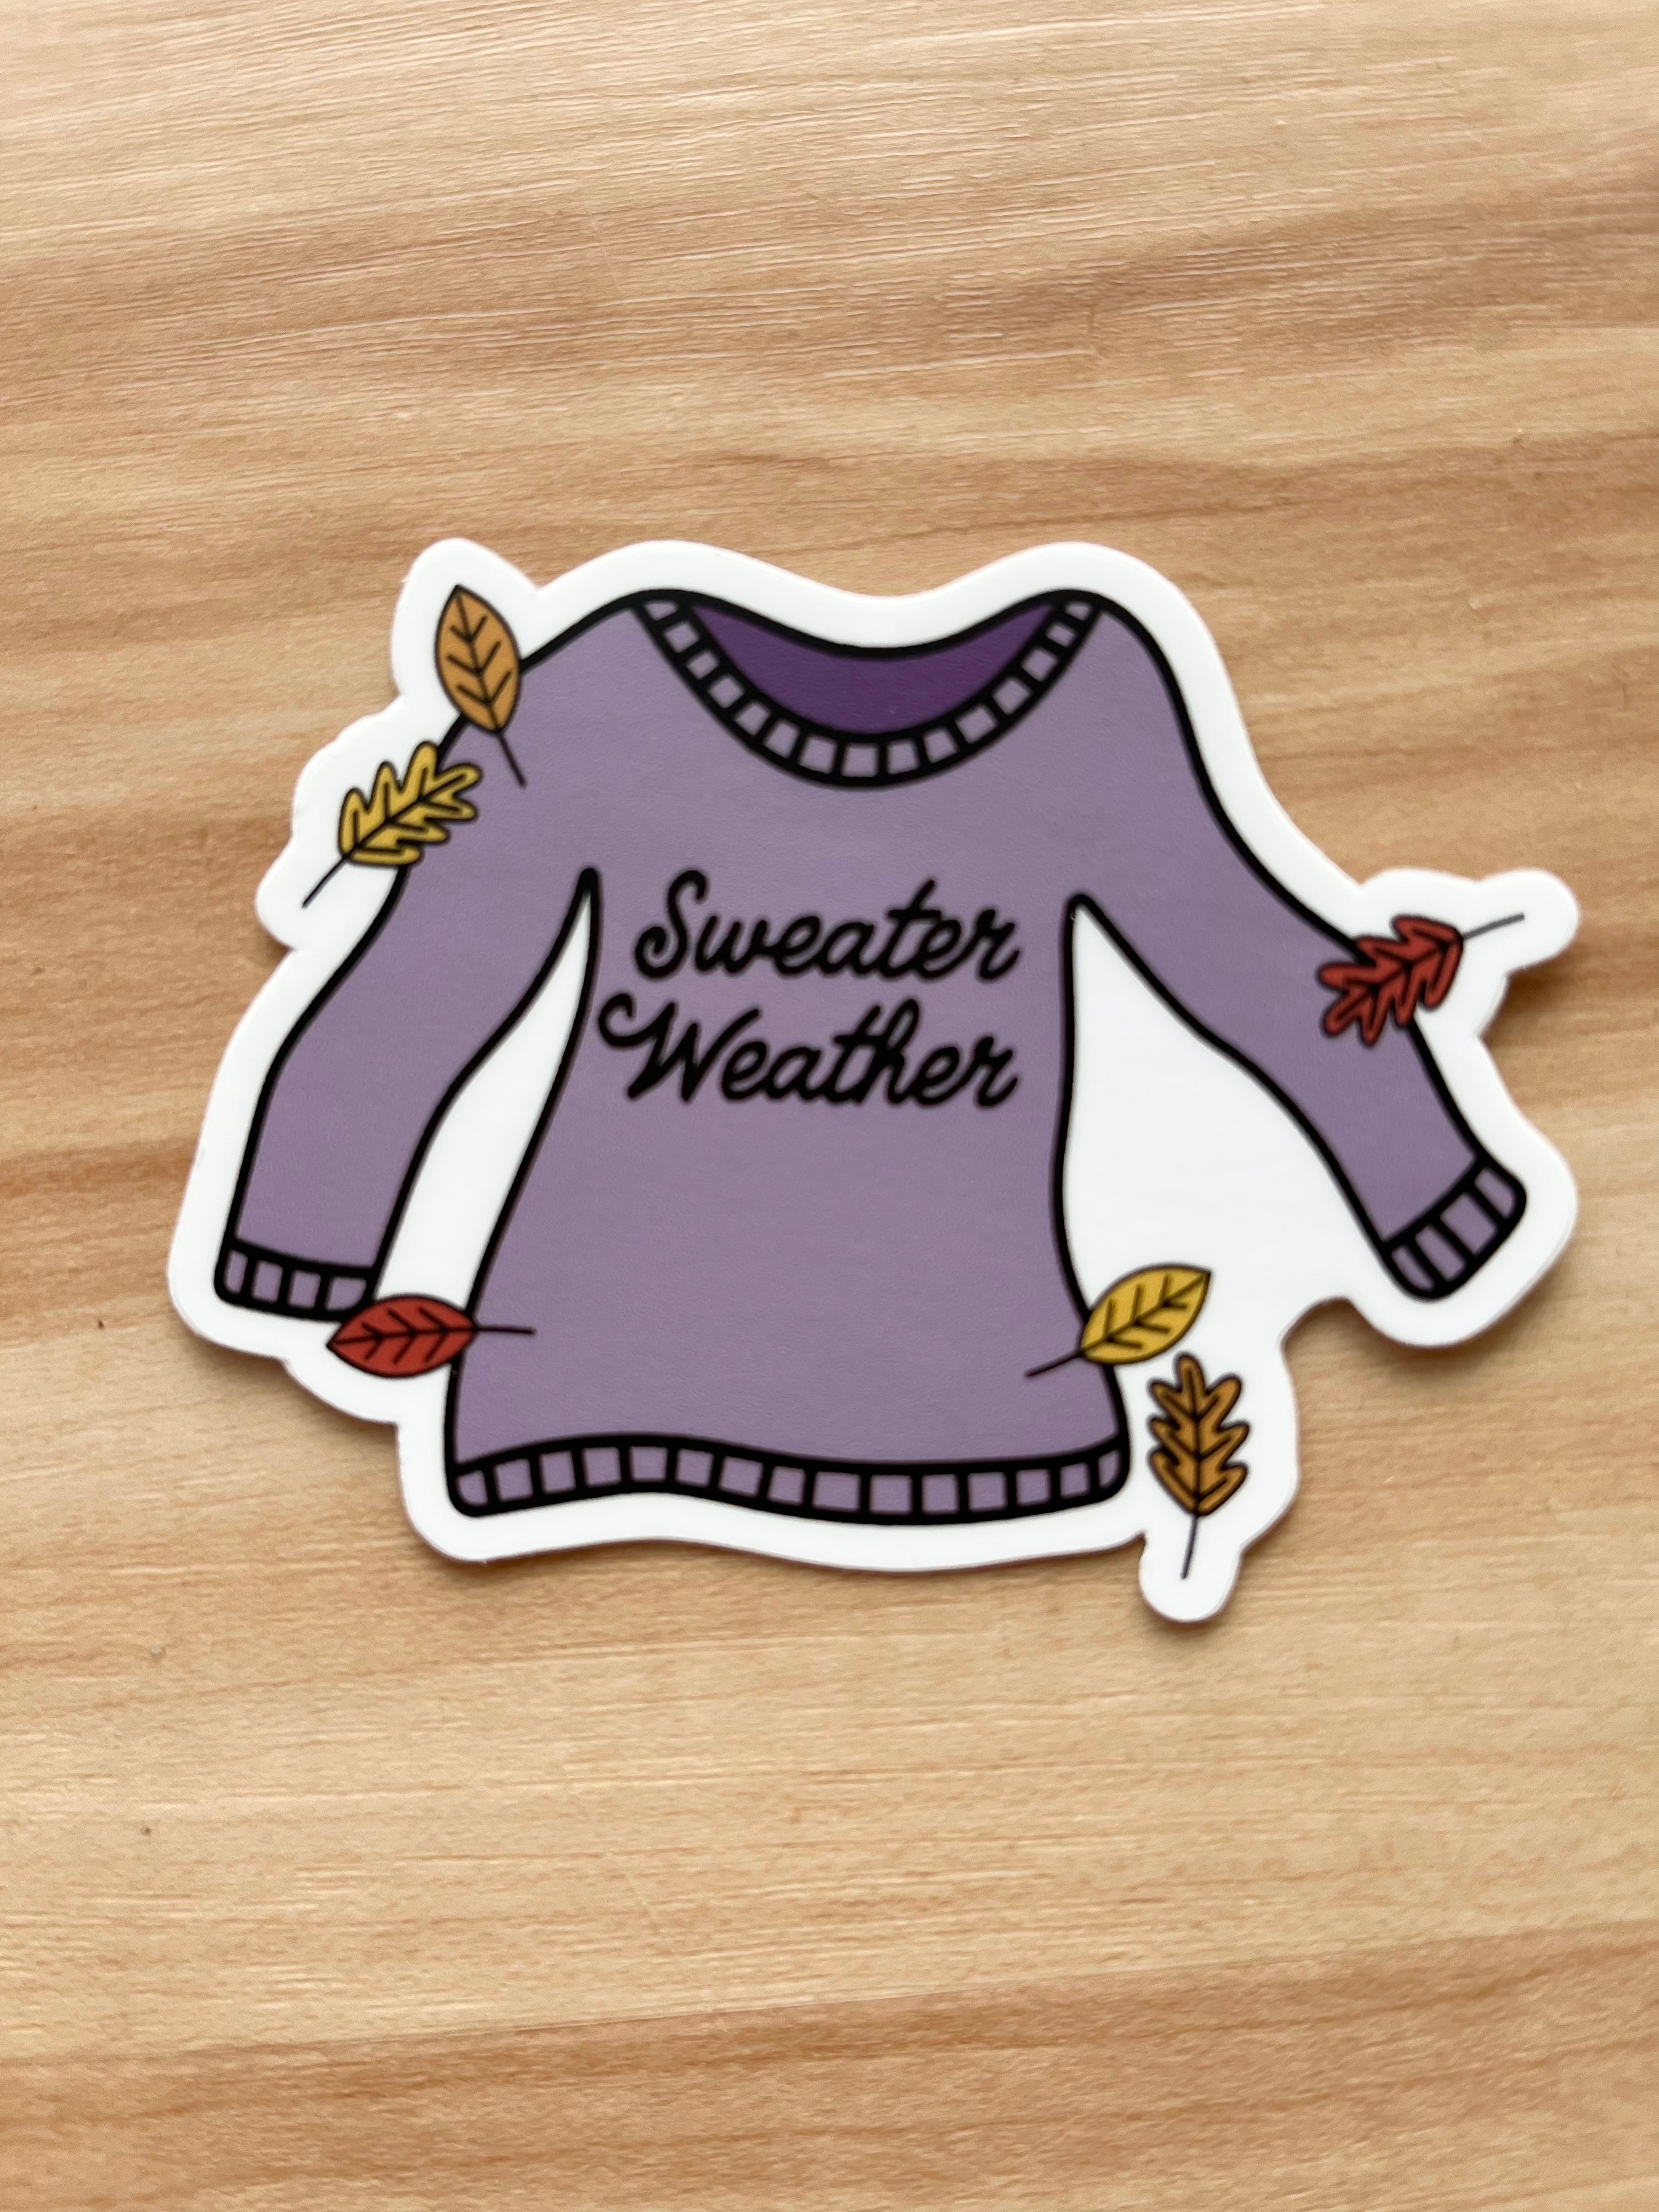 Sweater Weather - Knitting Themed Stickers